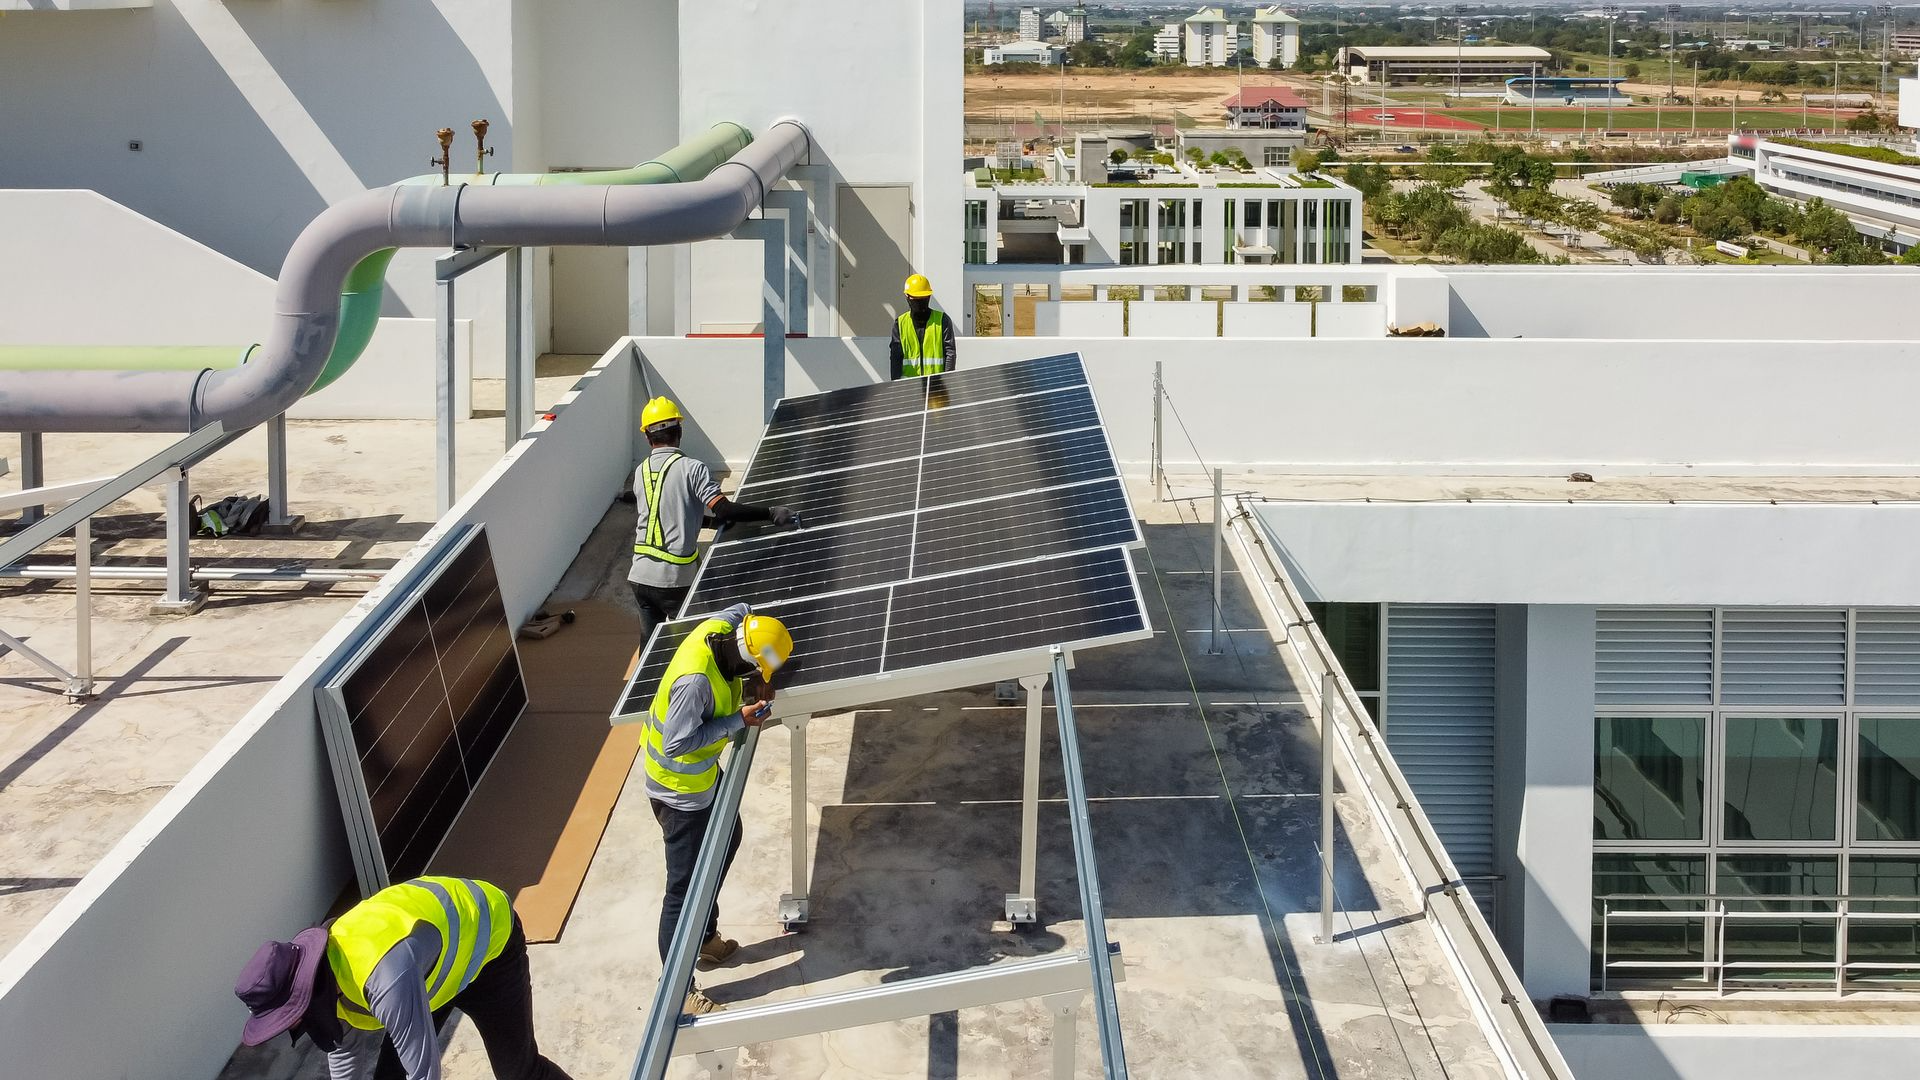 Implementing renewables early in the construction process